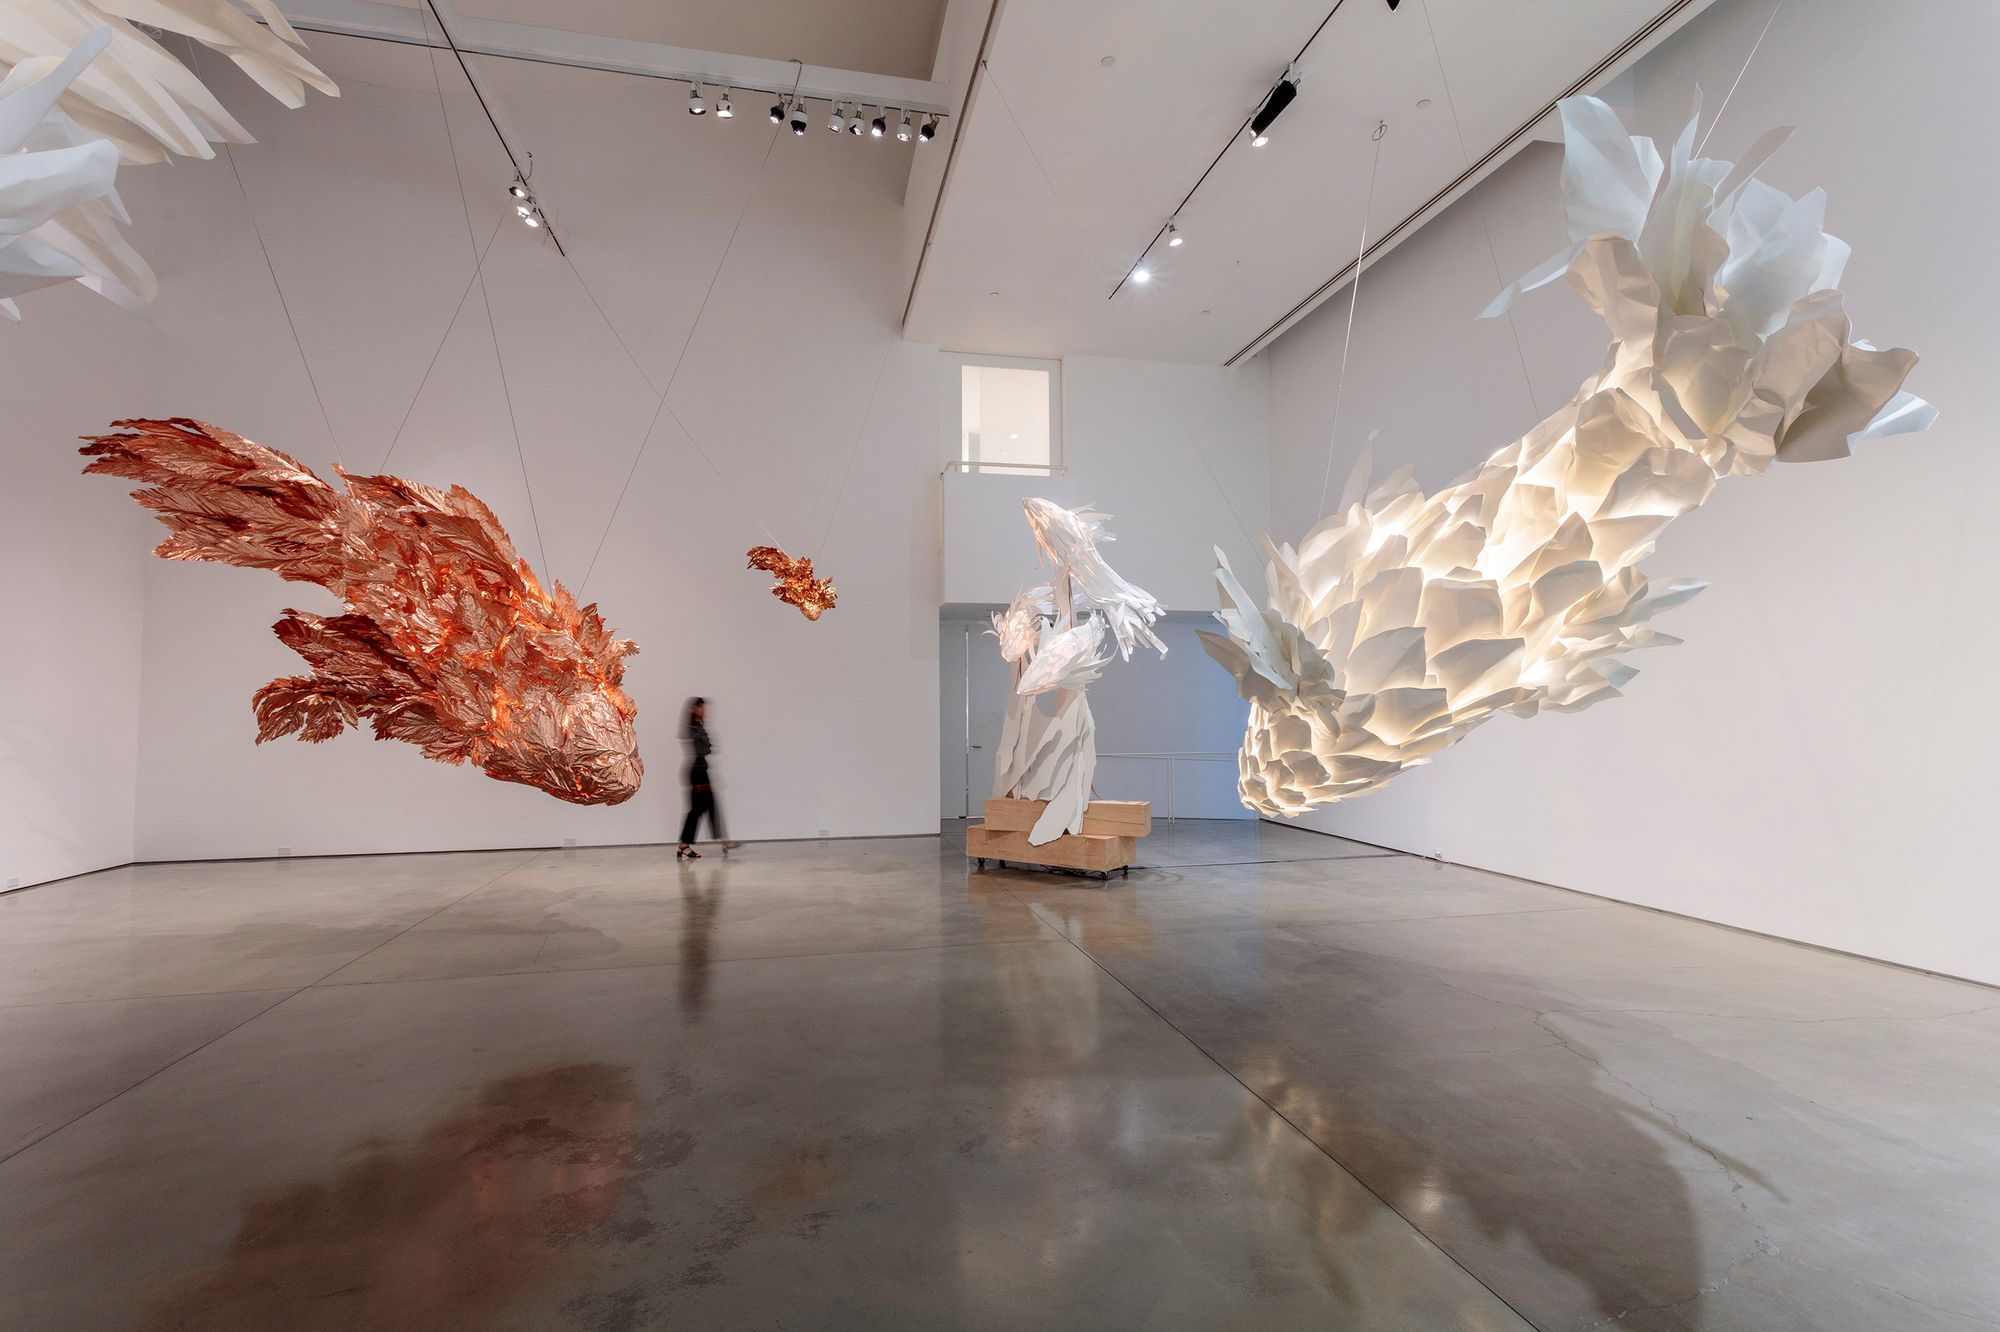 Frank Gehry: Fish Lamps at London's Gagosian Gallery